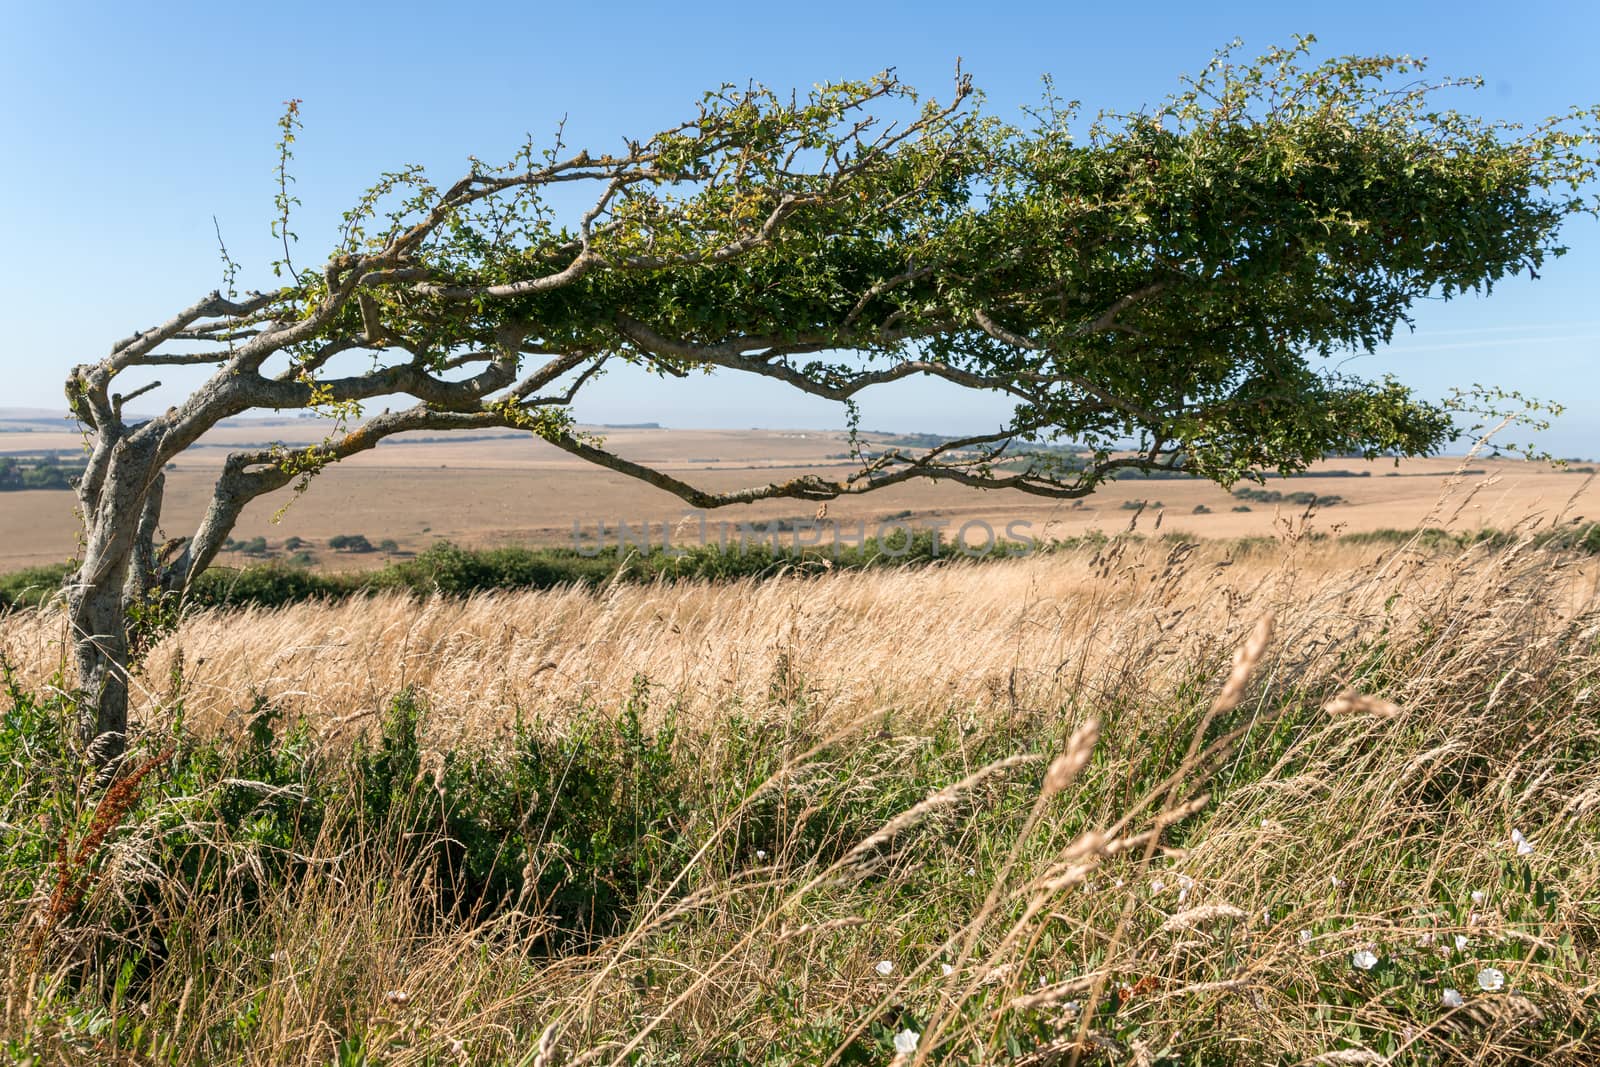 Tree bent over due to prolonged force of the wind near Beachy Head in East Sussex